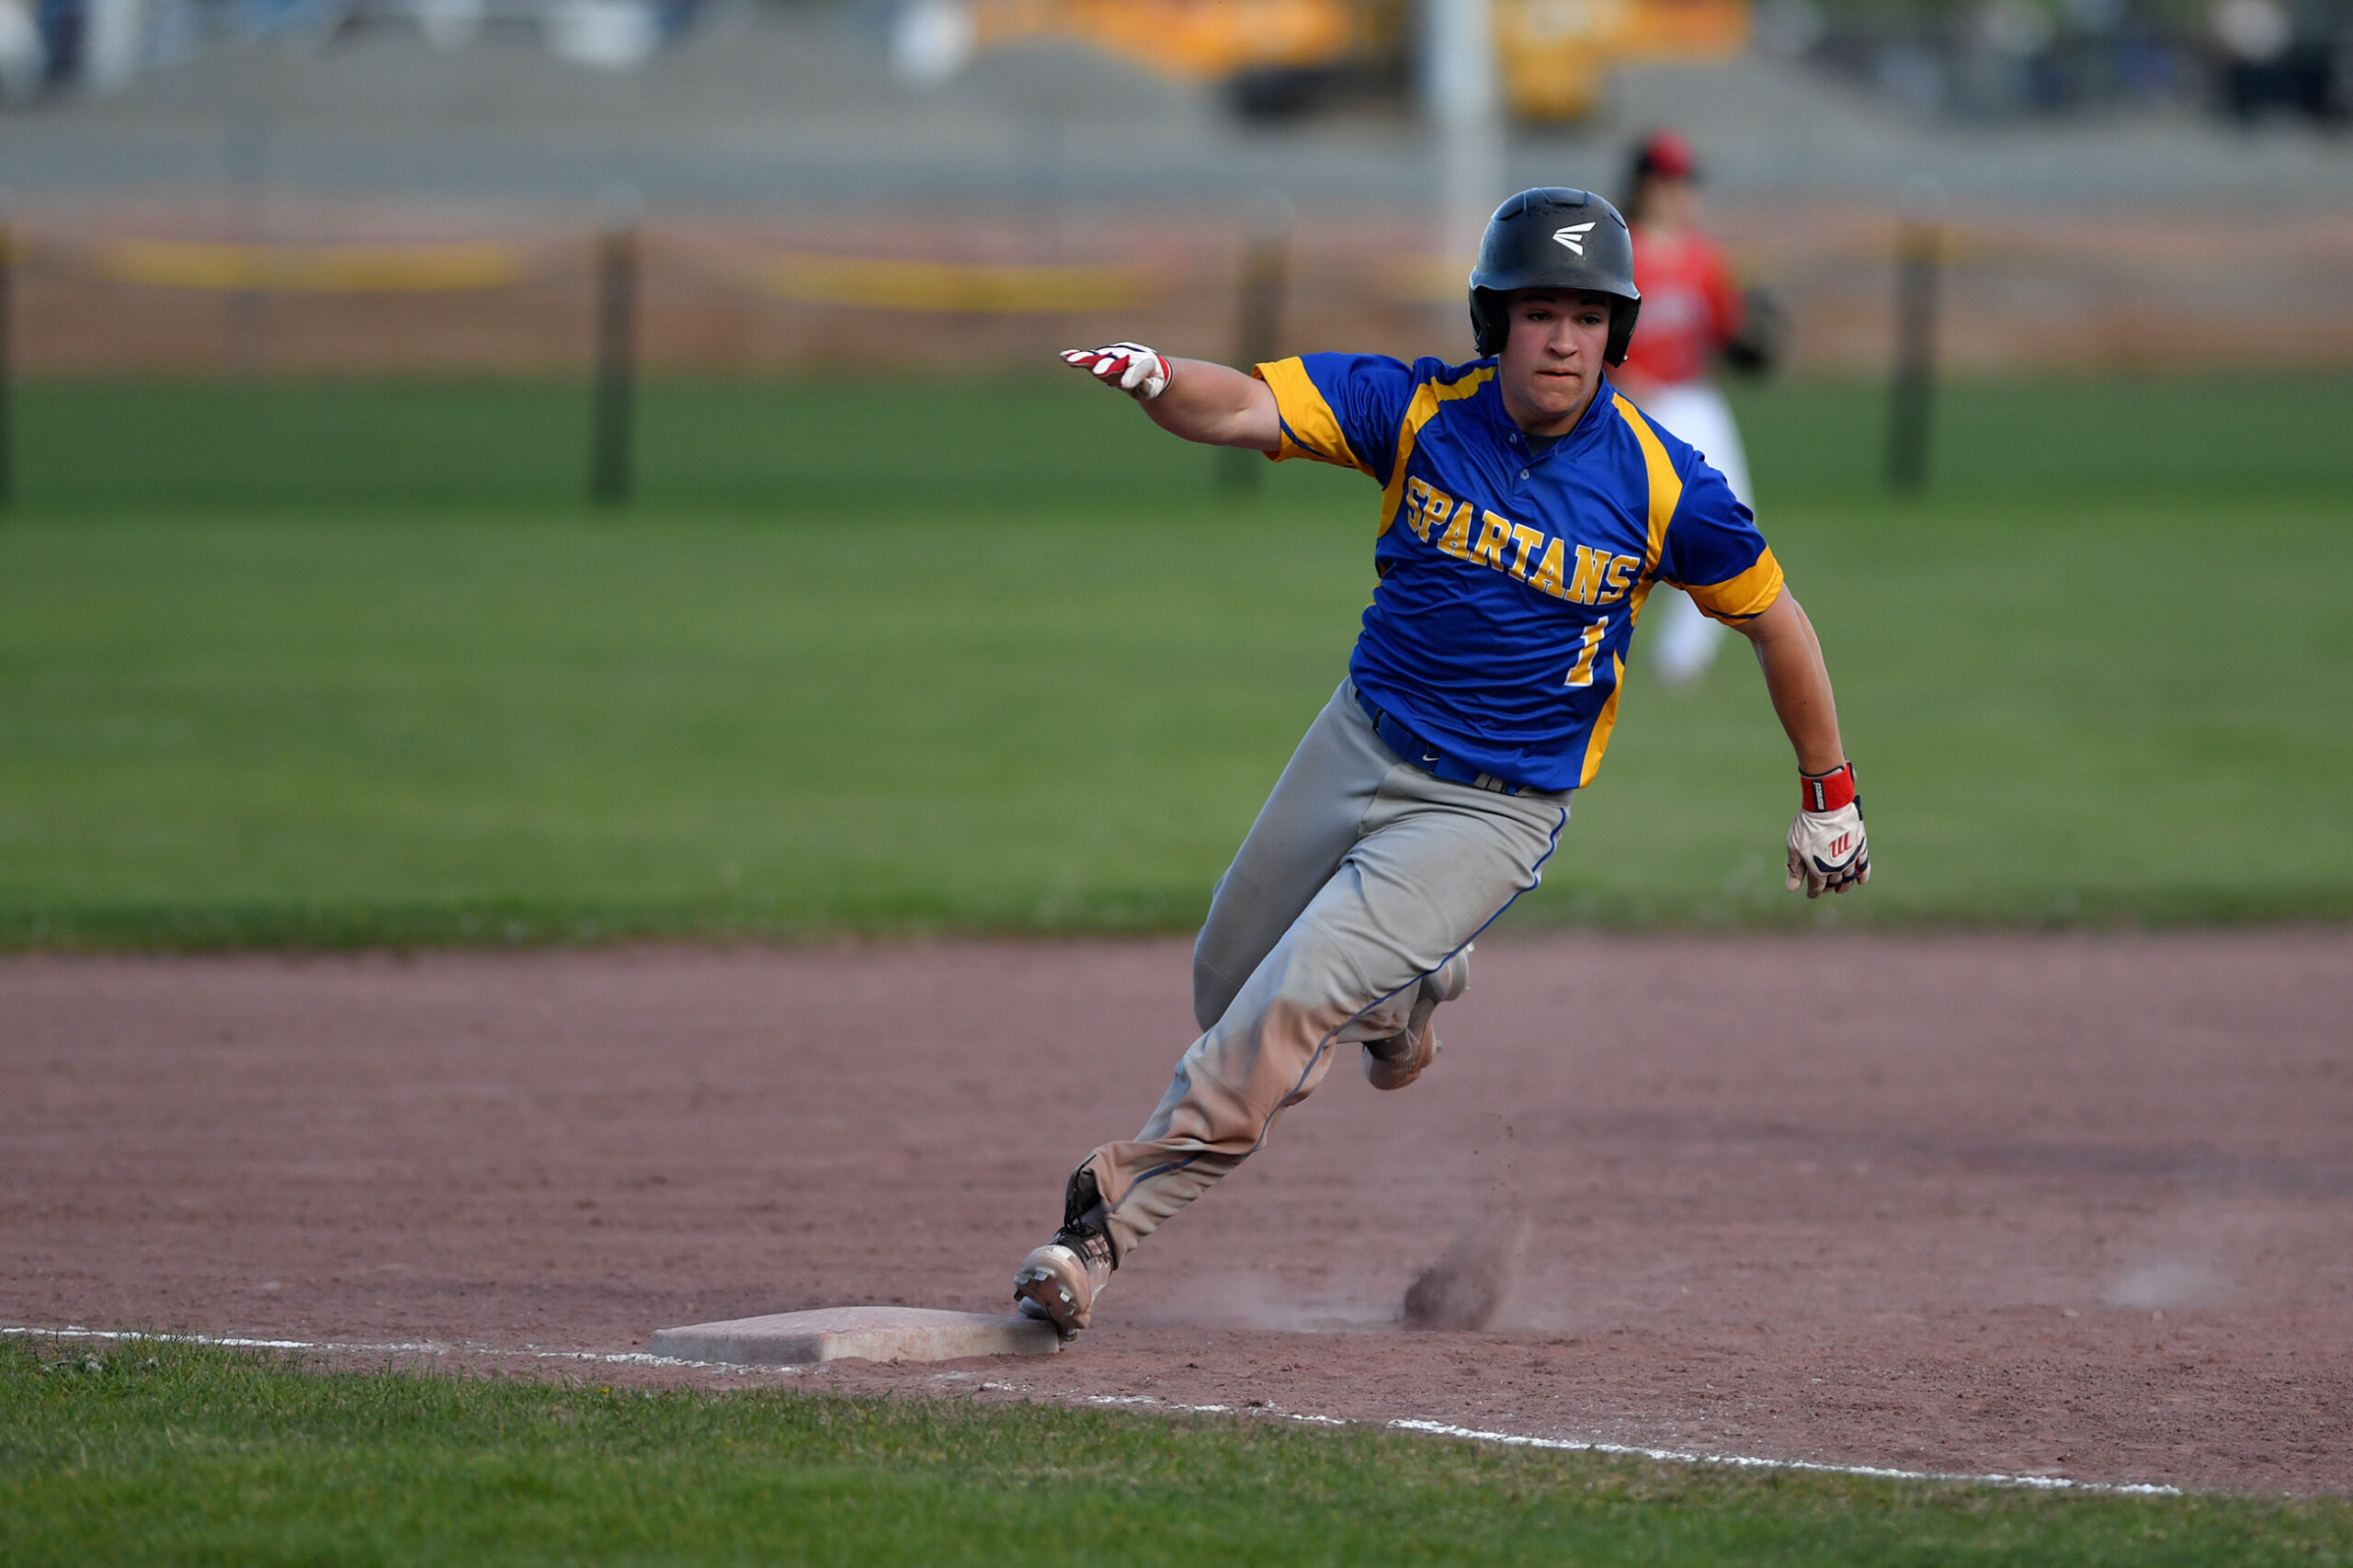 Carson Correa (1) of Queensbury rounds third and heads home to score